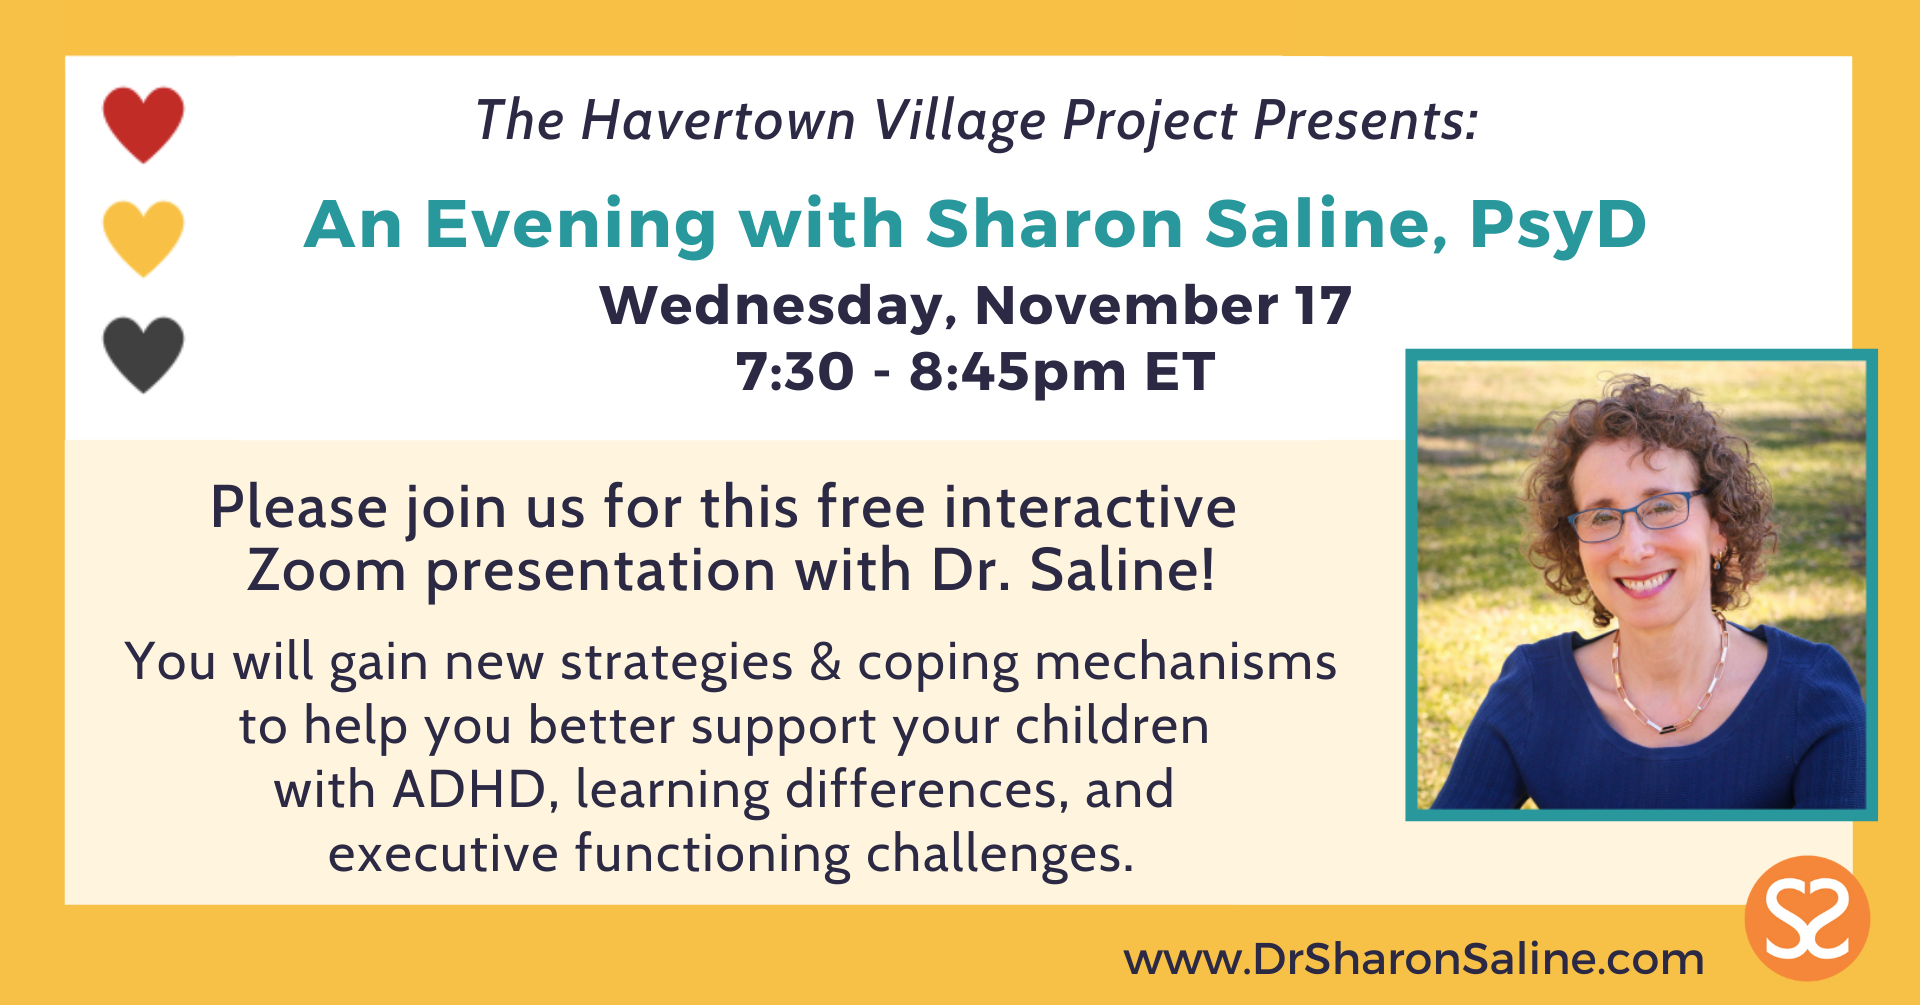 Havertown Village Project Presents and Evening with Dr. Sharon Saline